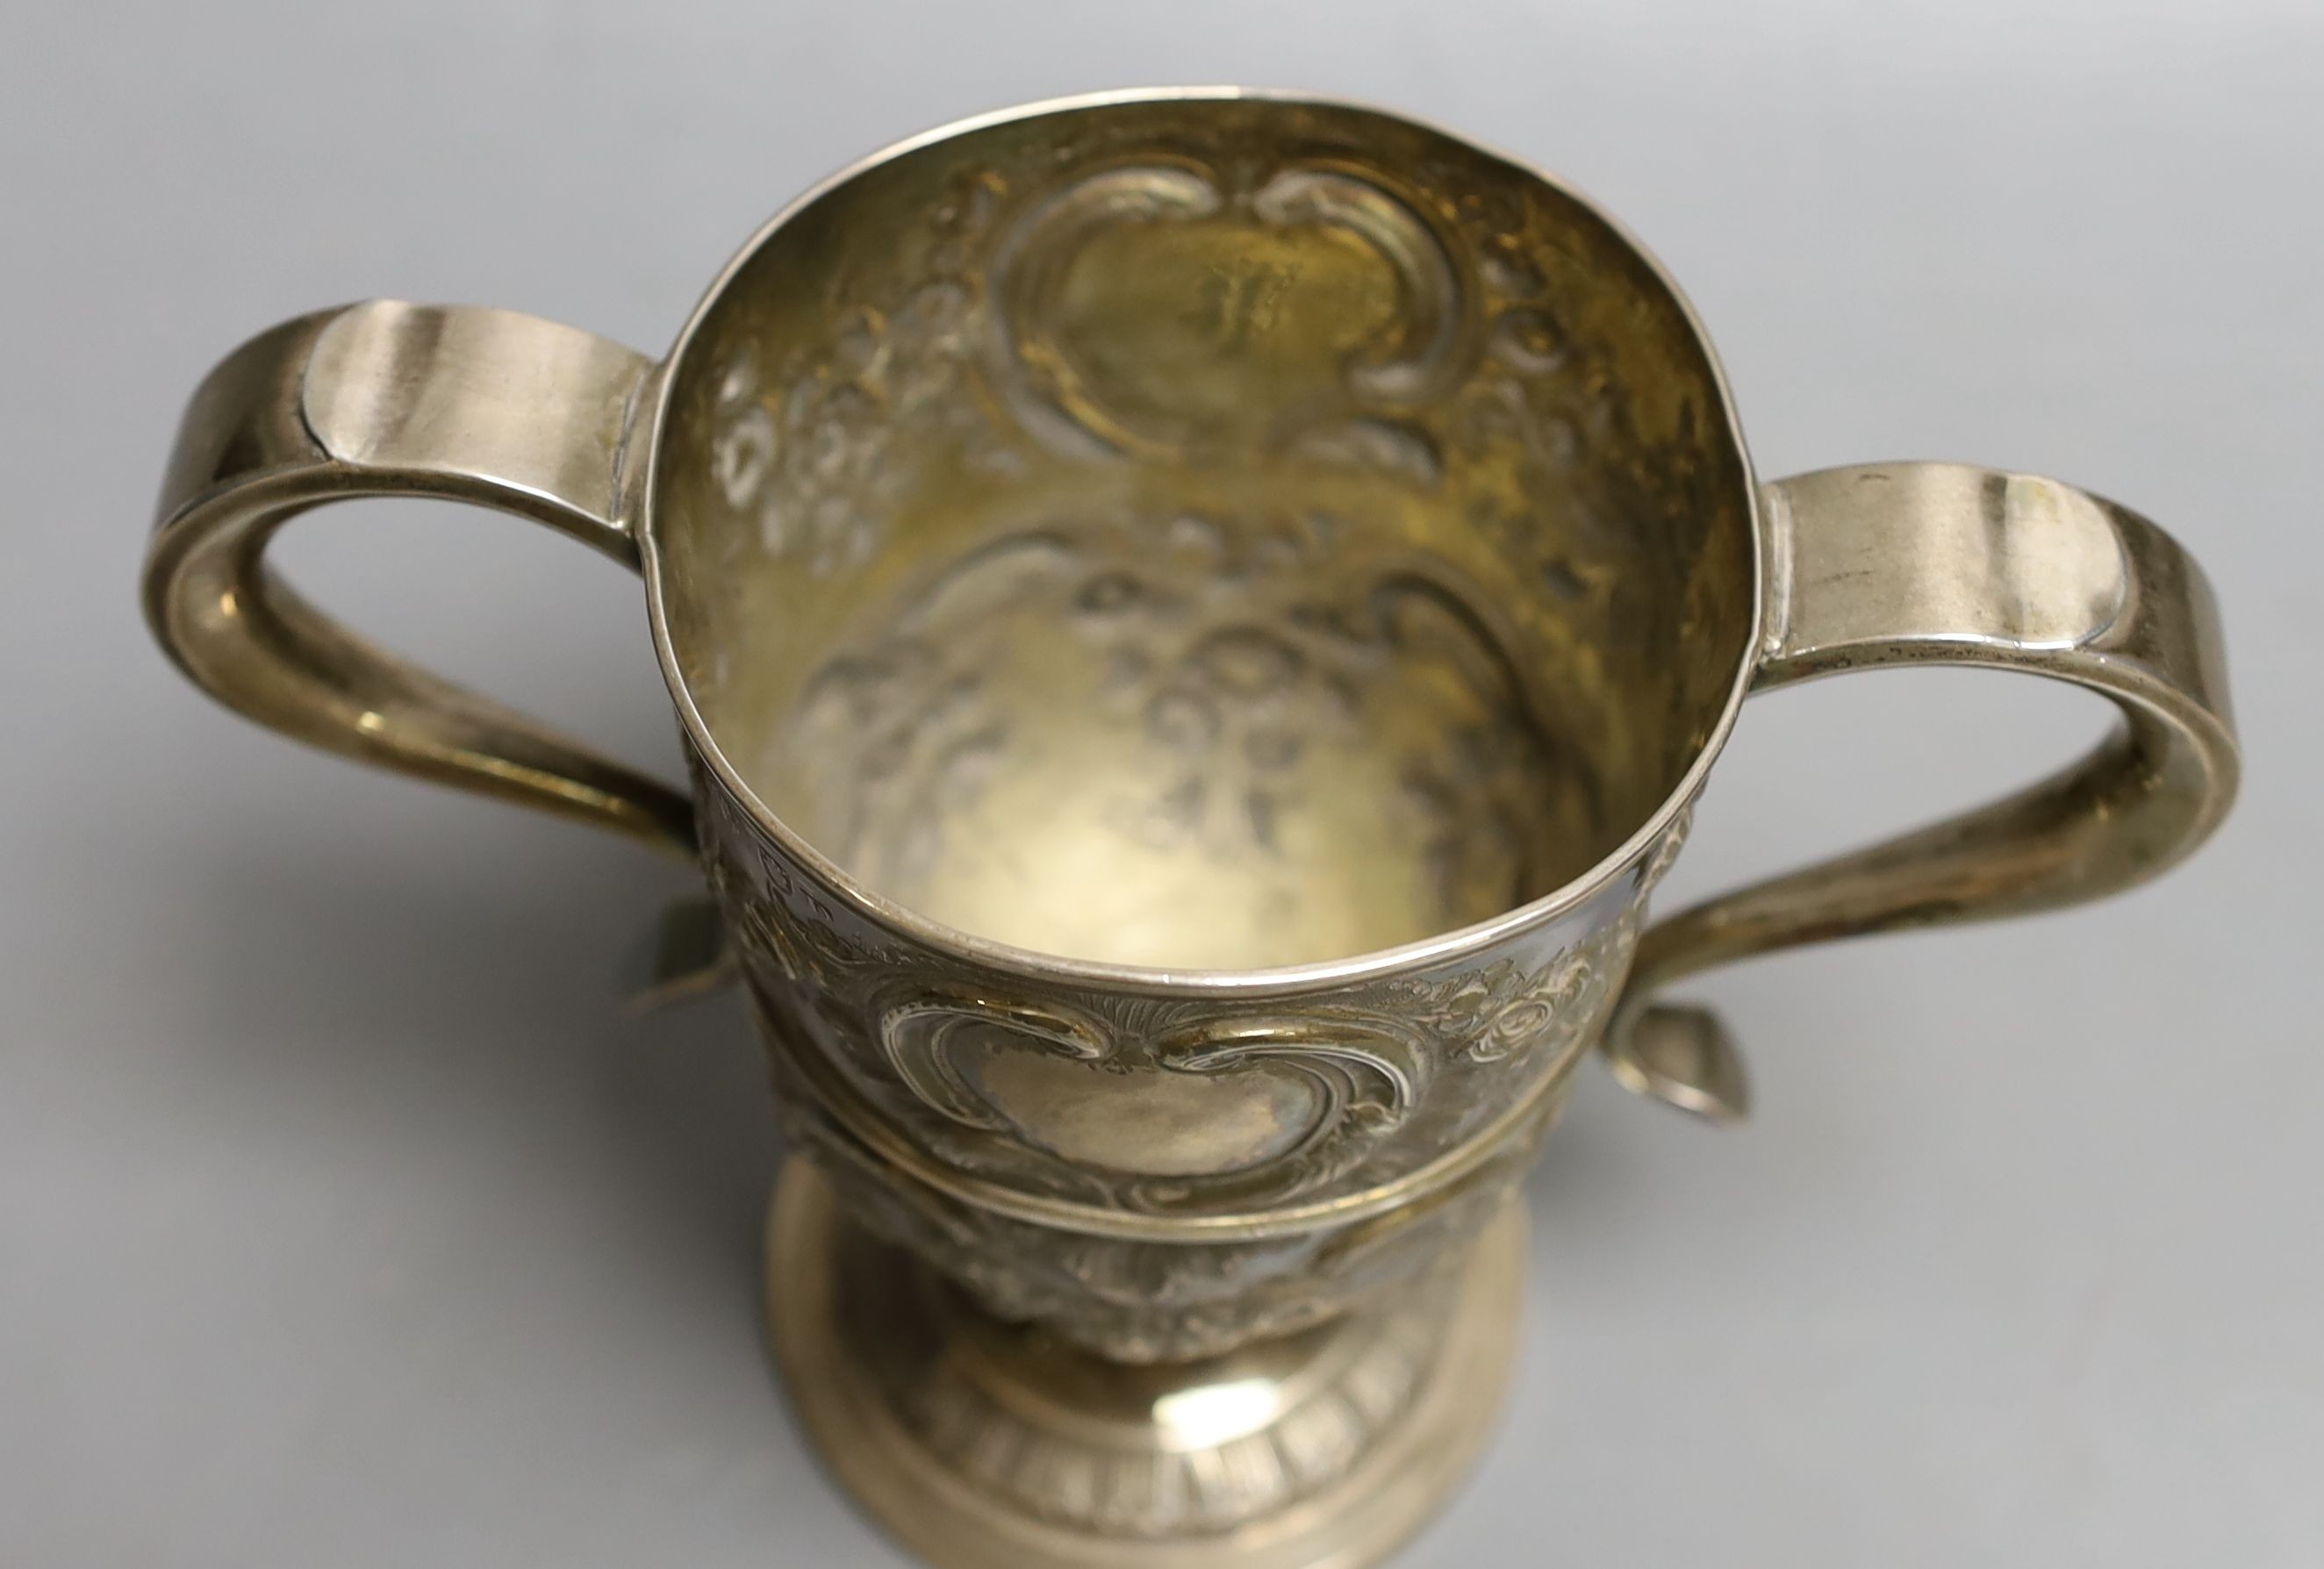 A George III provincial silver two handled pedestal cup, with later embossed decoration, Langlands & Robertson Newcastle, 1794, height 14.7cm, 10.5oz.